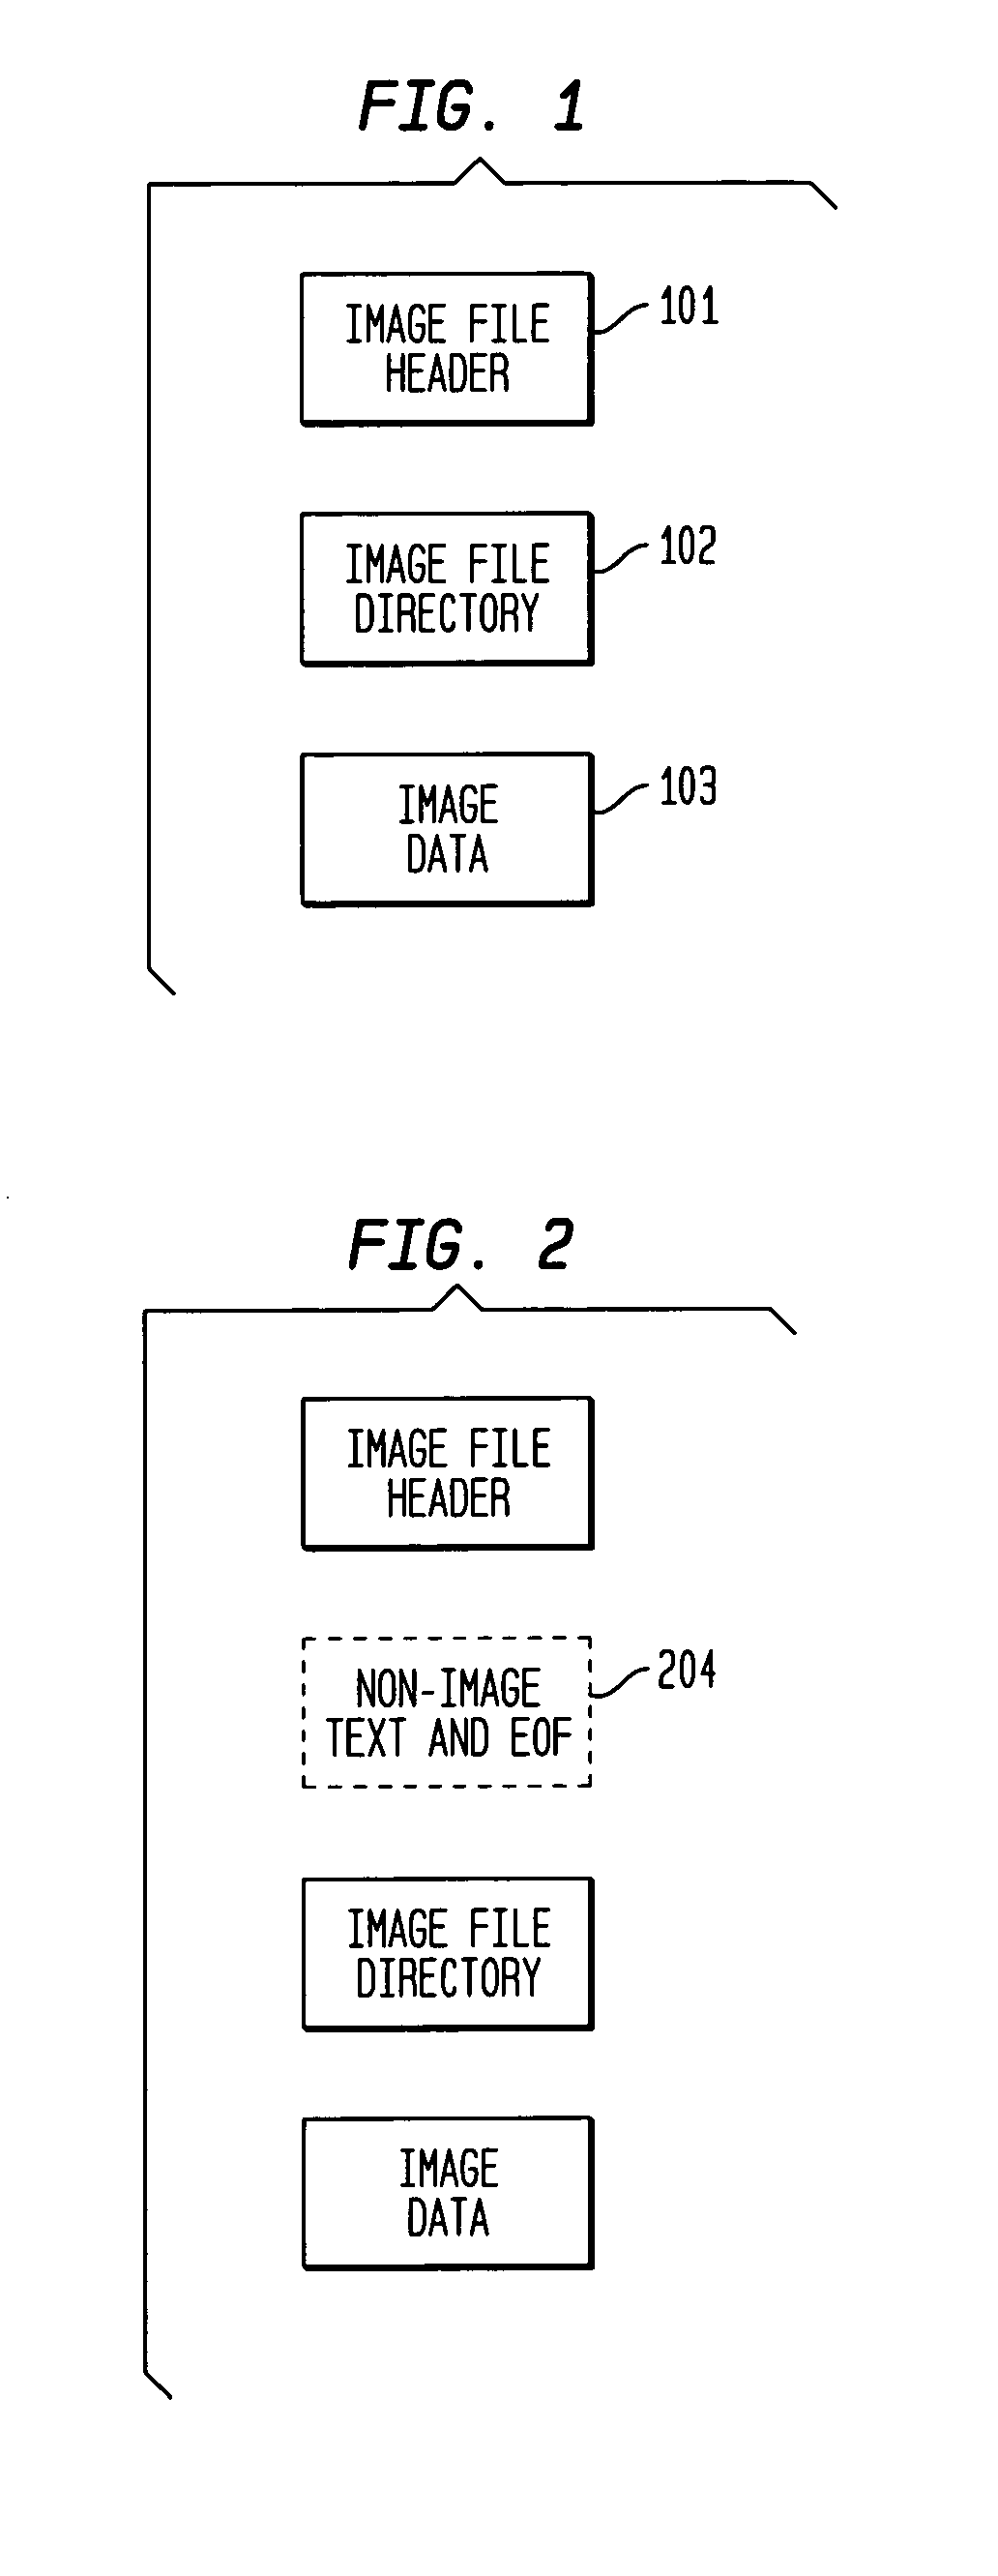 Enhanced human computer user interface system for searching and browsing documents